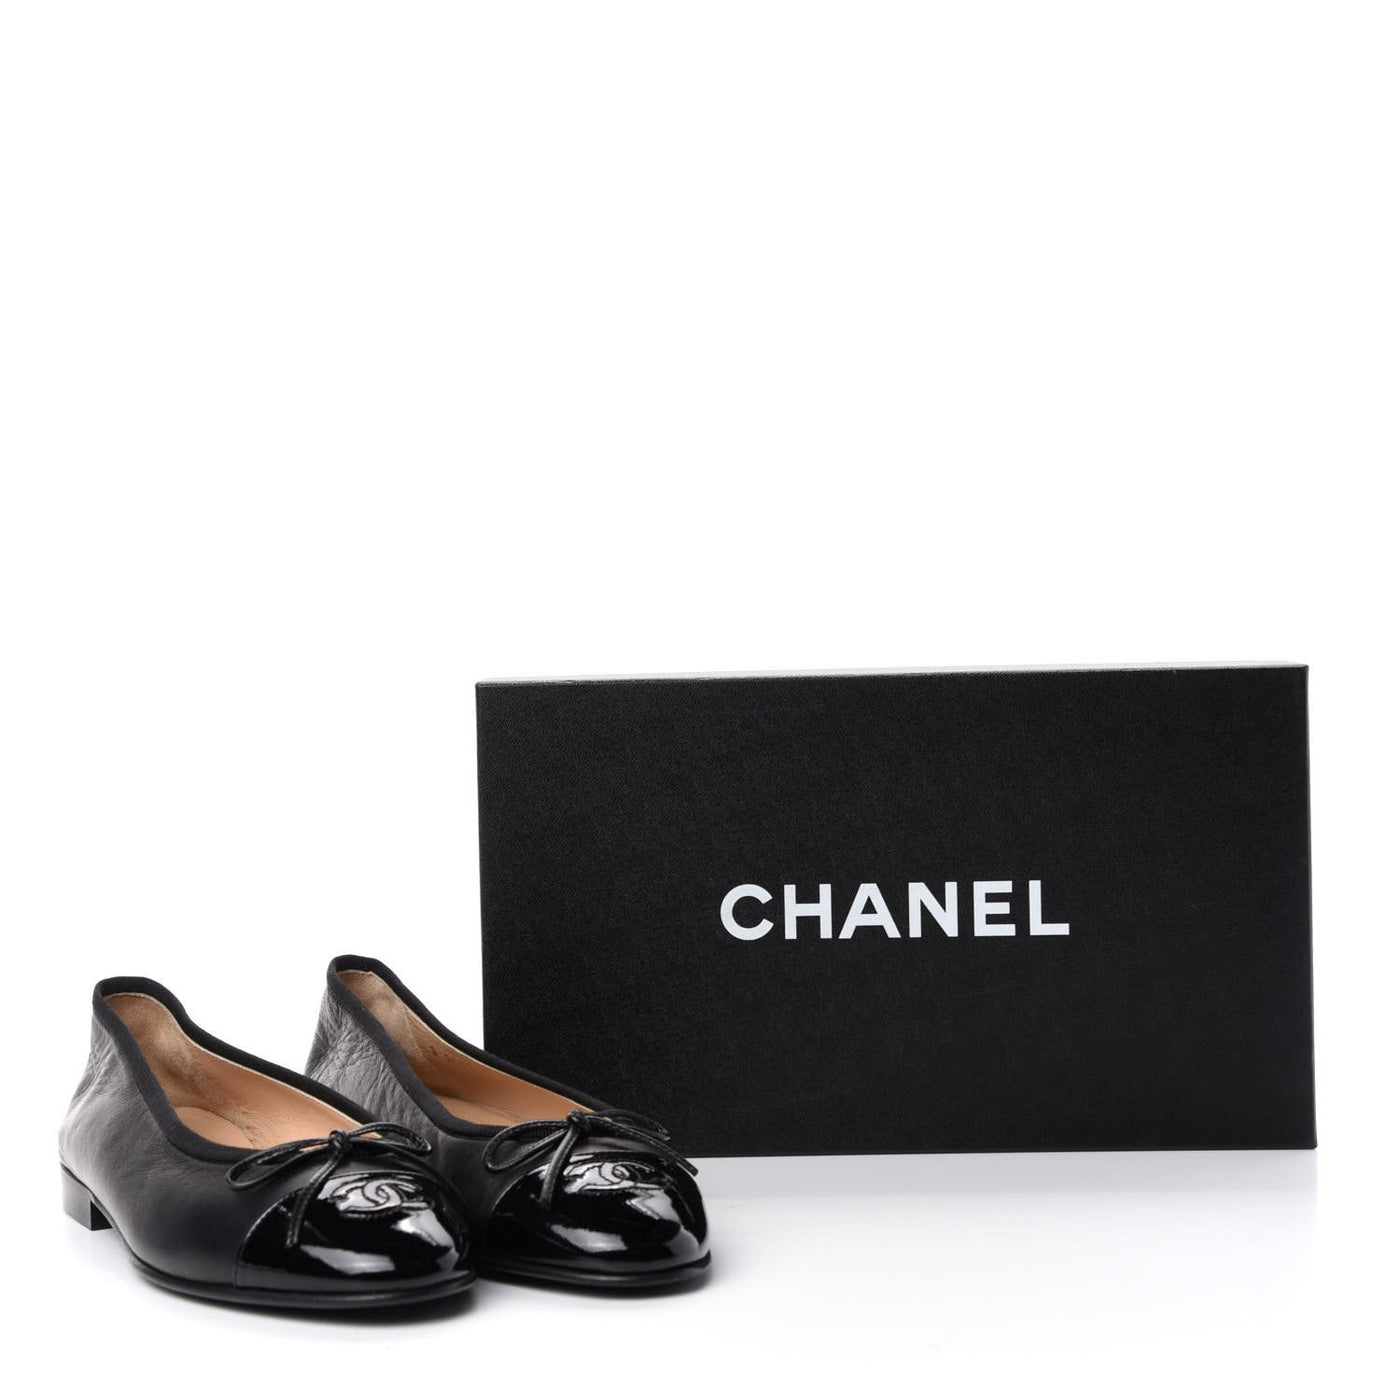 CHANEL ballet flat size 37 with box rrp £650